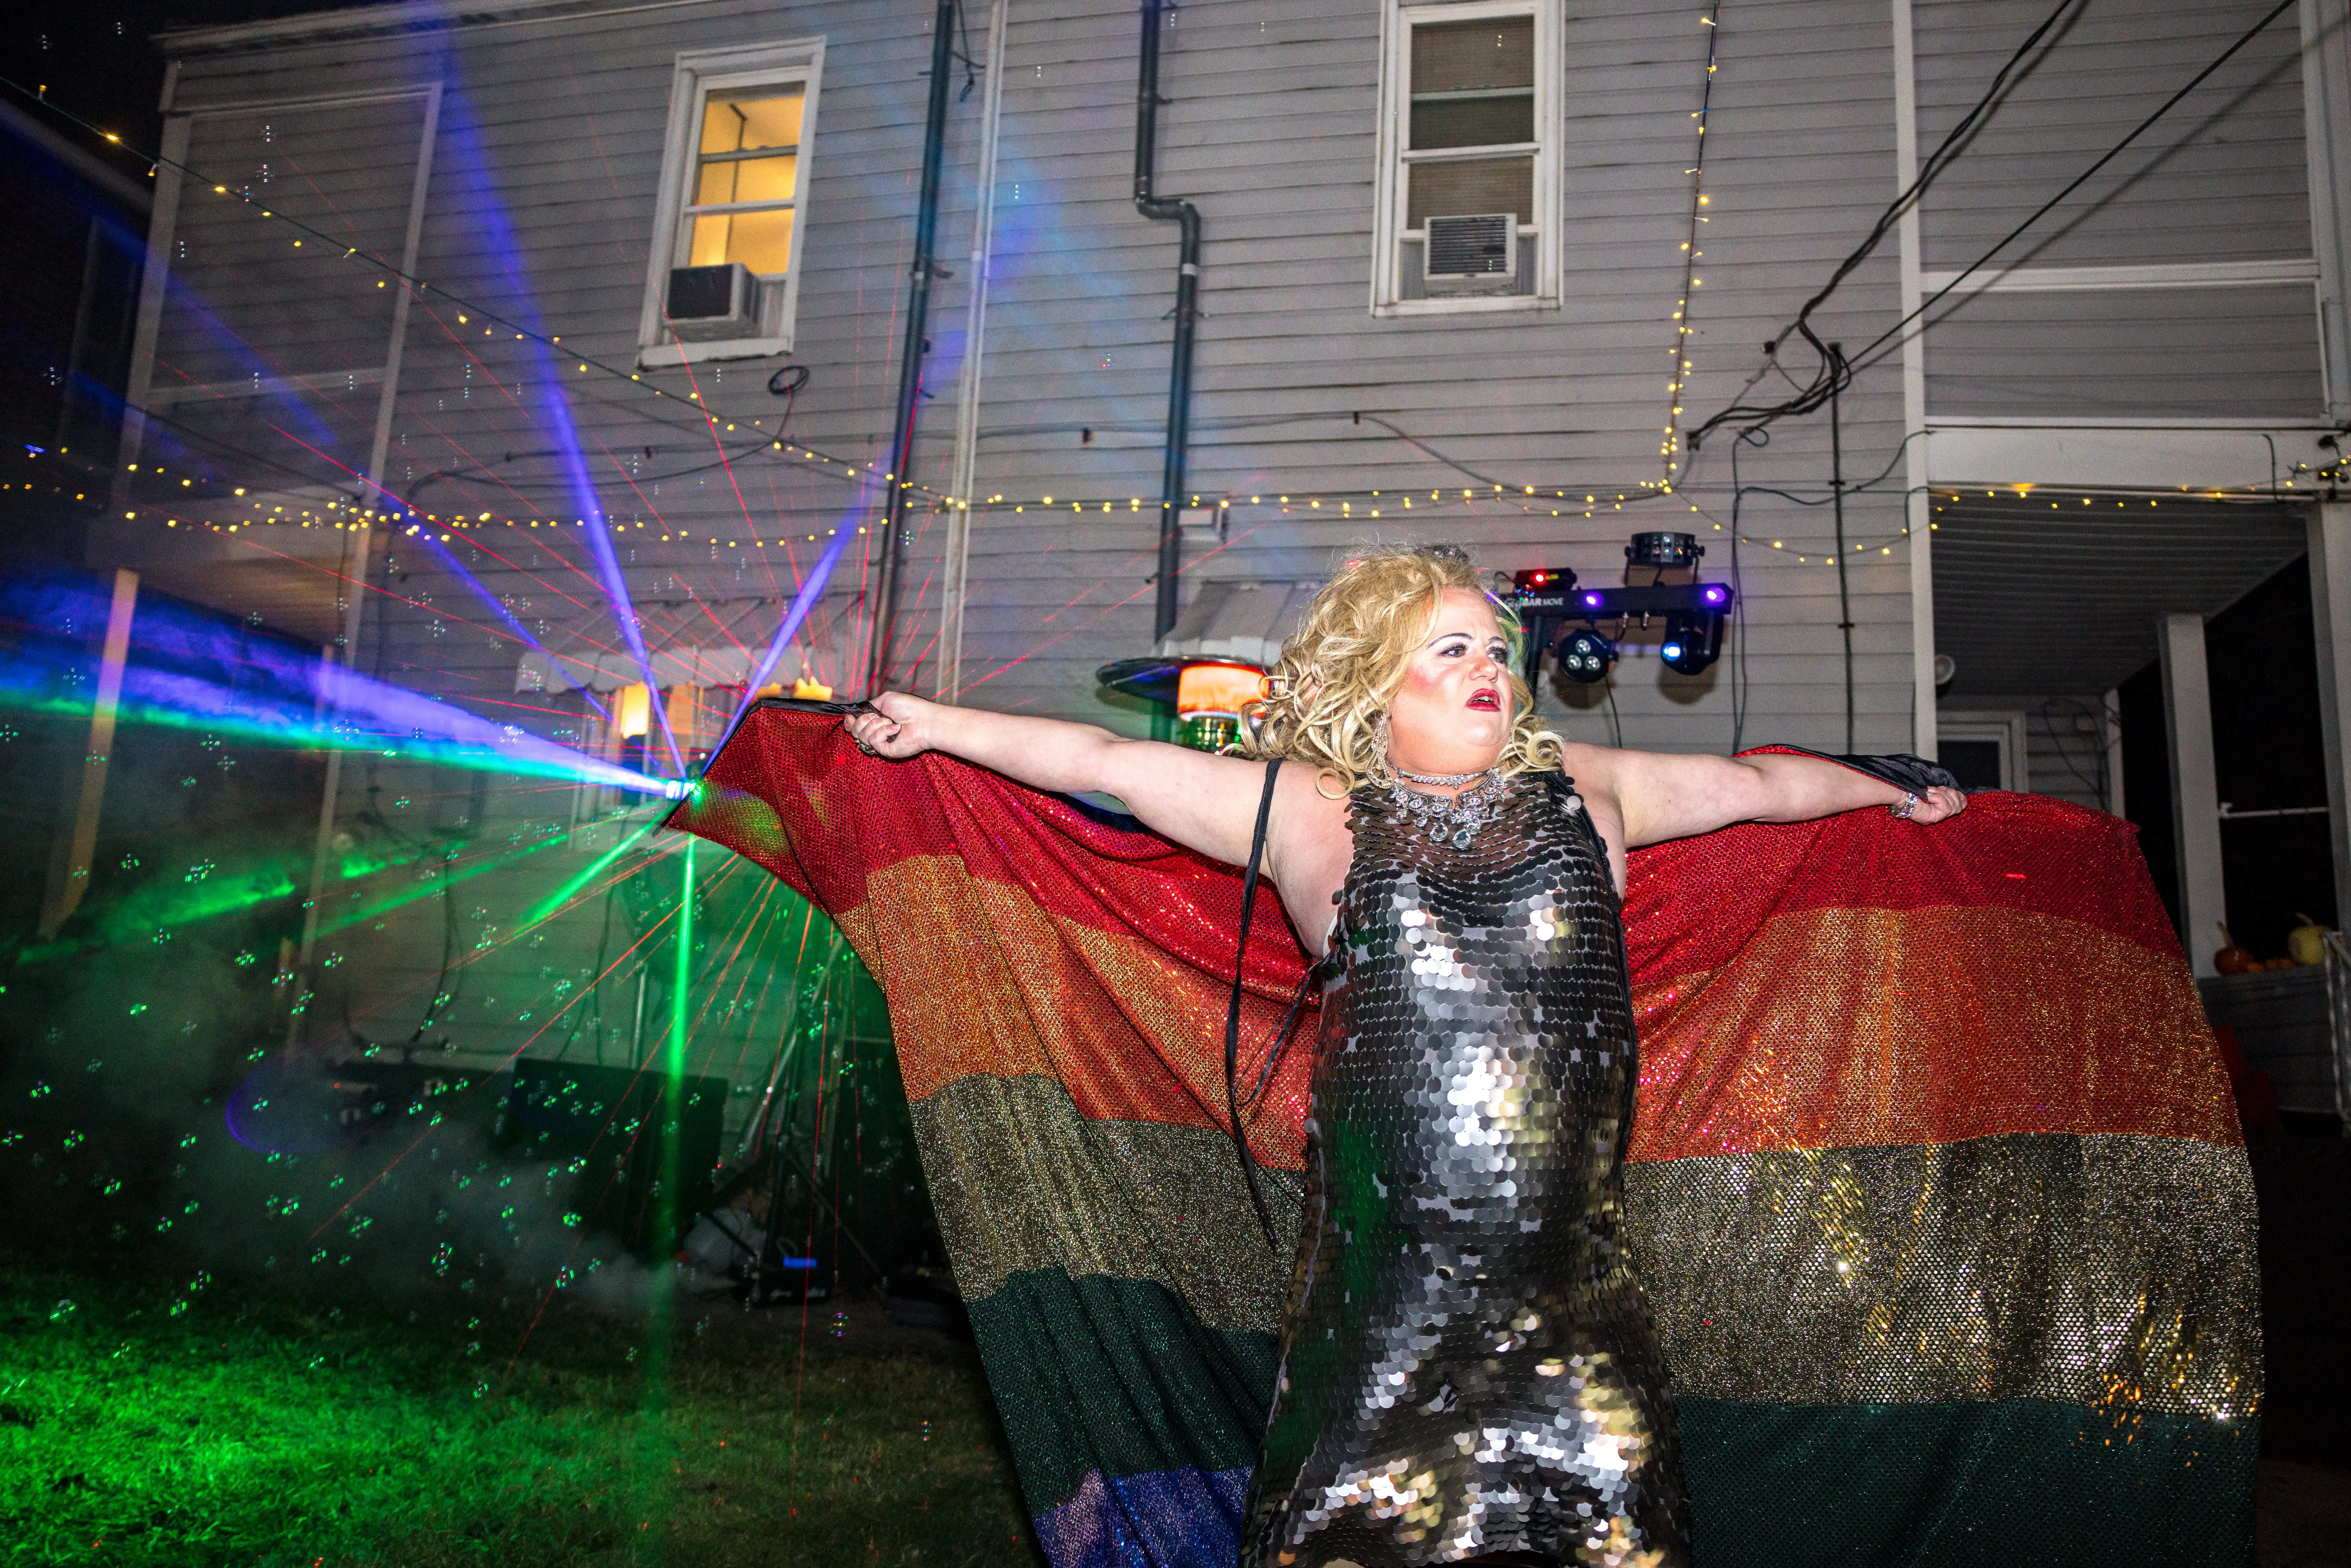 A drag queen poses wearing a sequin dress and holding a rainbow flag made of sequins.